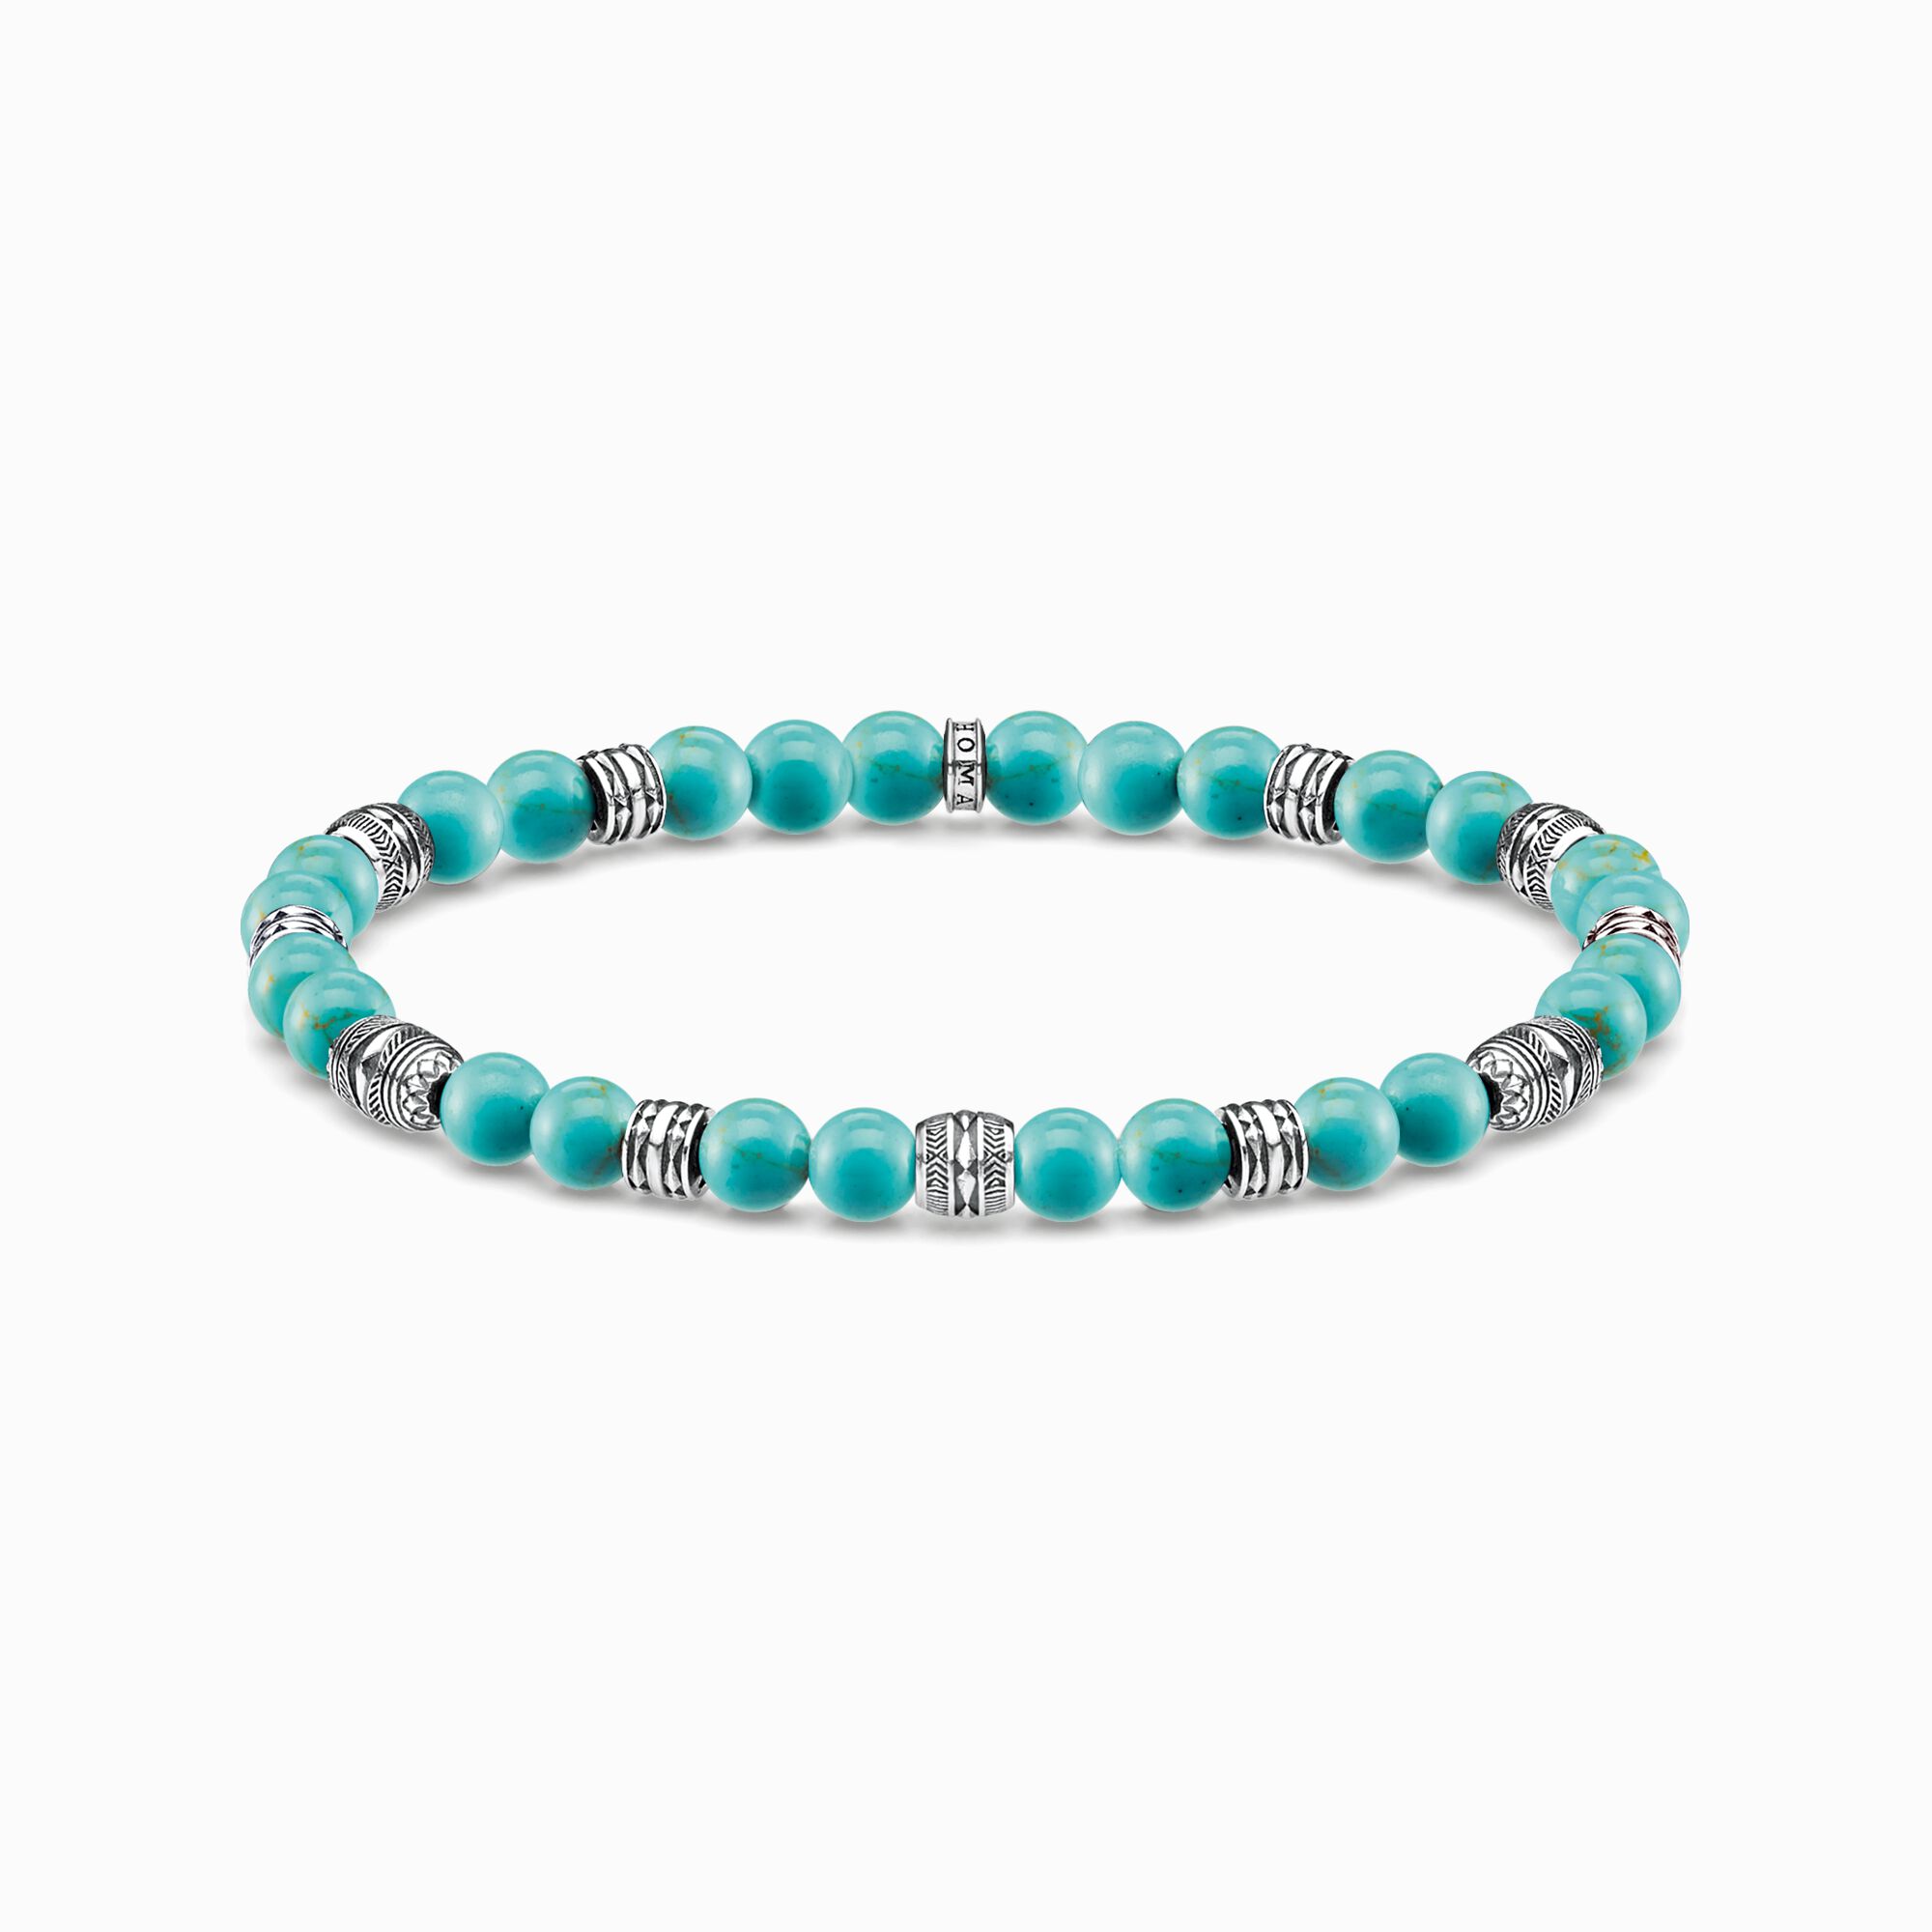 Bracelet lucky charm turquoise from the  collection in the THOMAS SABO online store